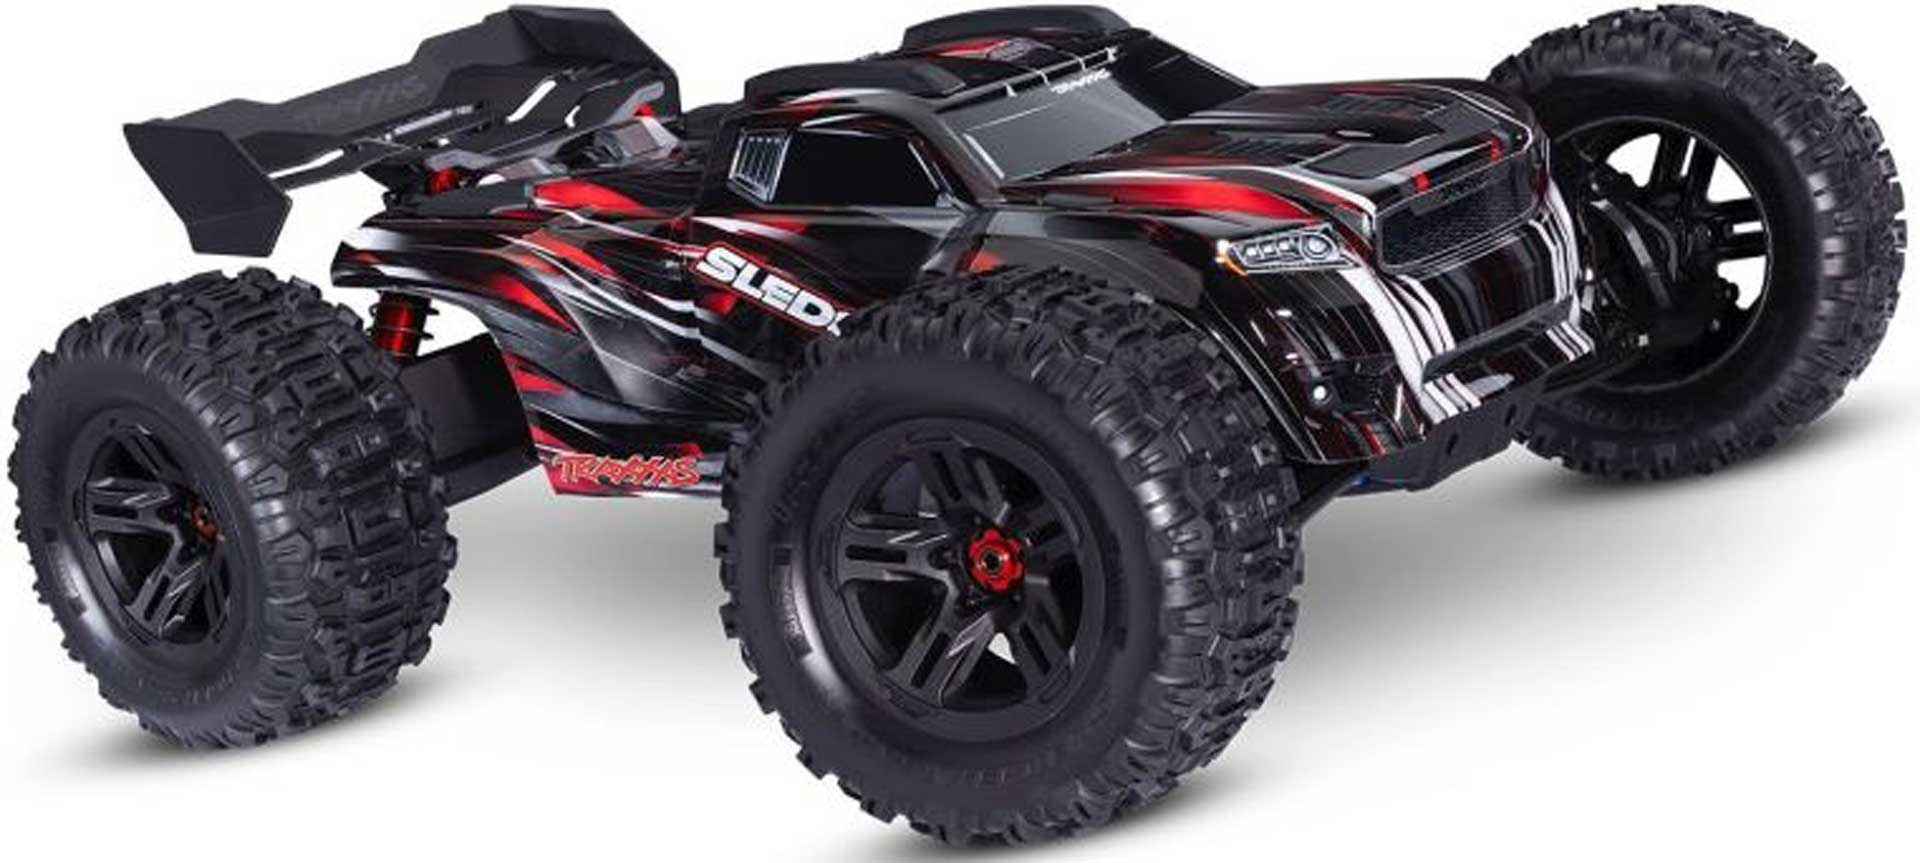 TRAXXAS SLEDGE 4X4 BELTED ROUGE 1/8 MONSTER-TRUCK RTR BRUSHLESS, SANS BATTERIE NI CHARGEUR